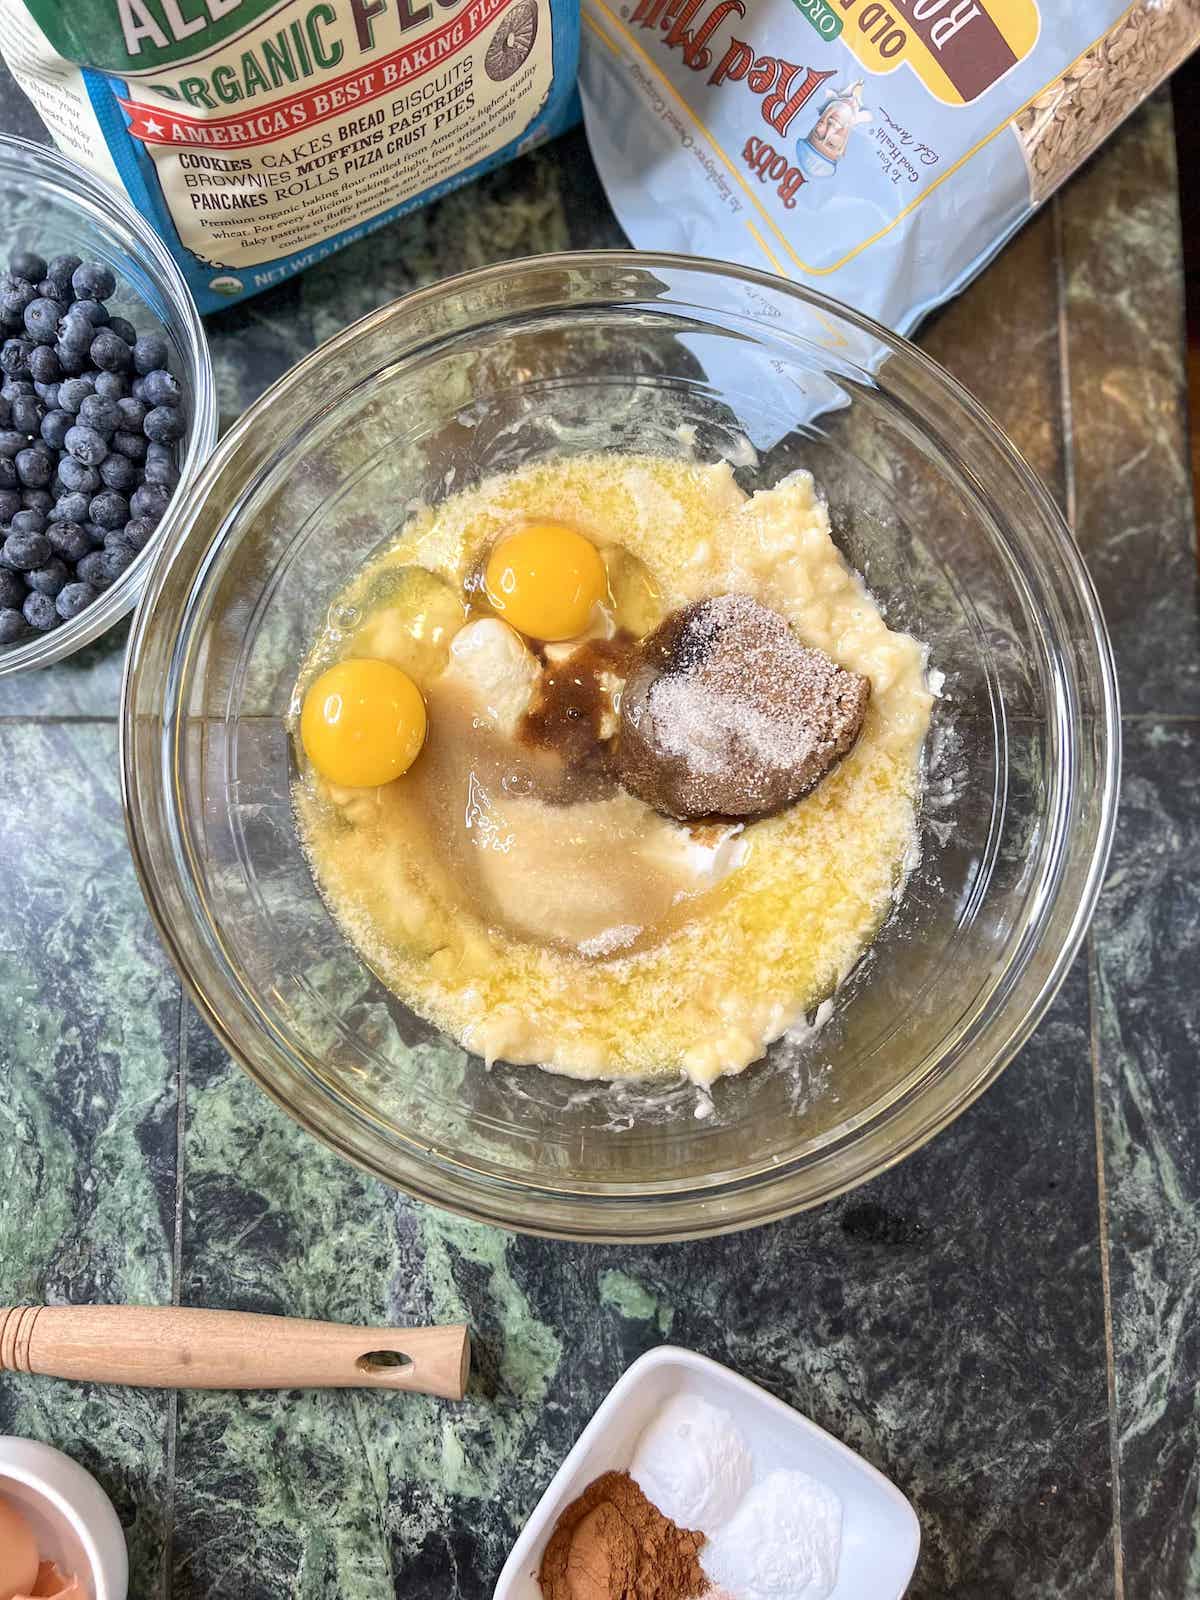 Adding wet ingredients to mashed bananas in a glass bowl.